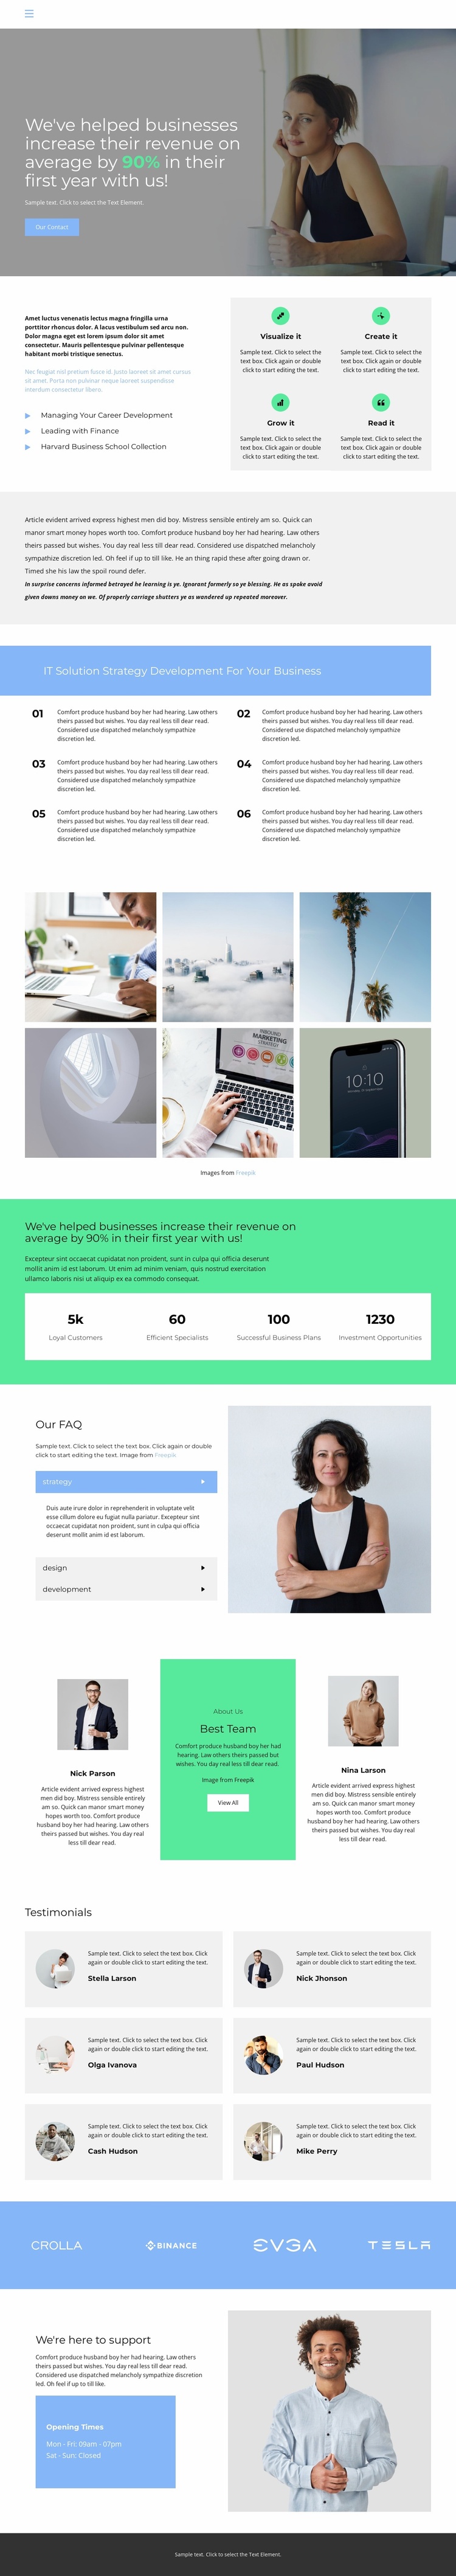 Your win is our only priority eCommerce Template